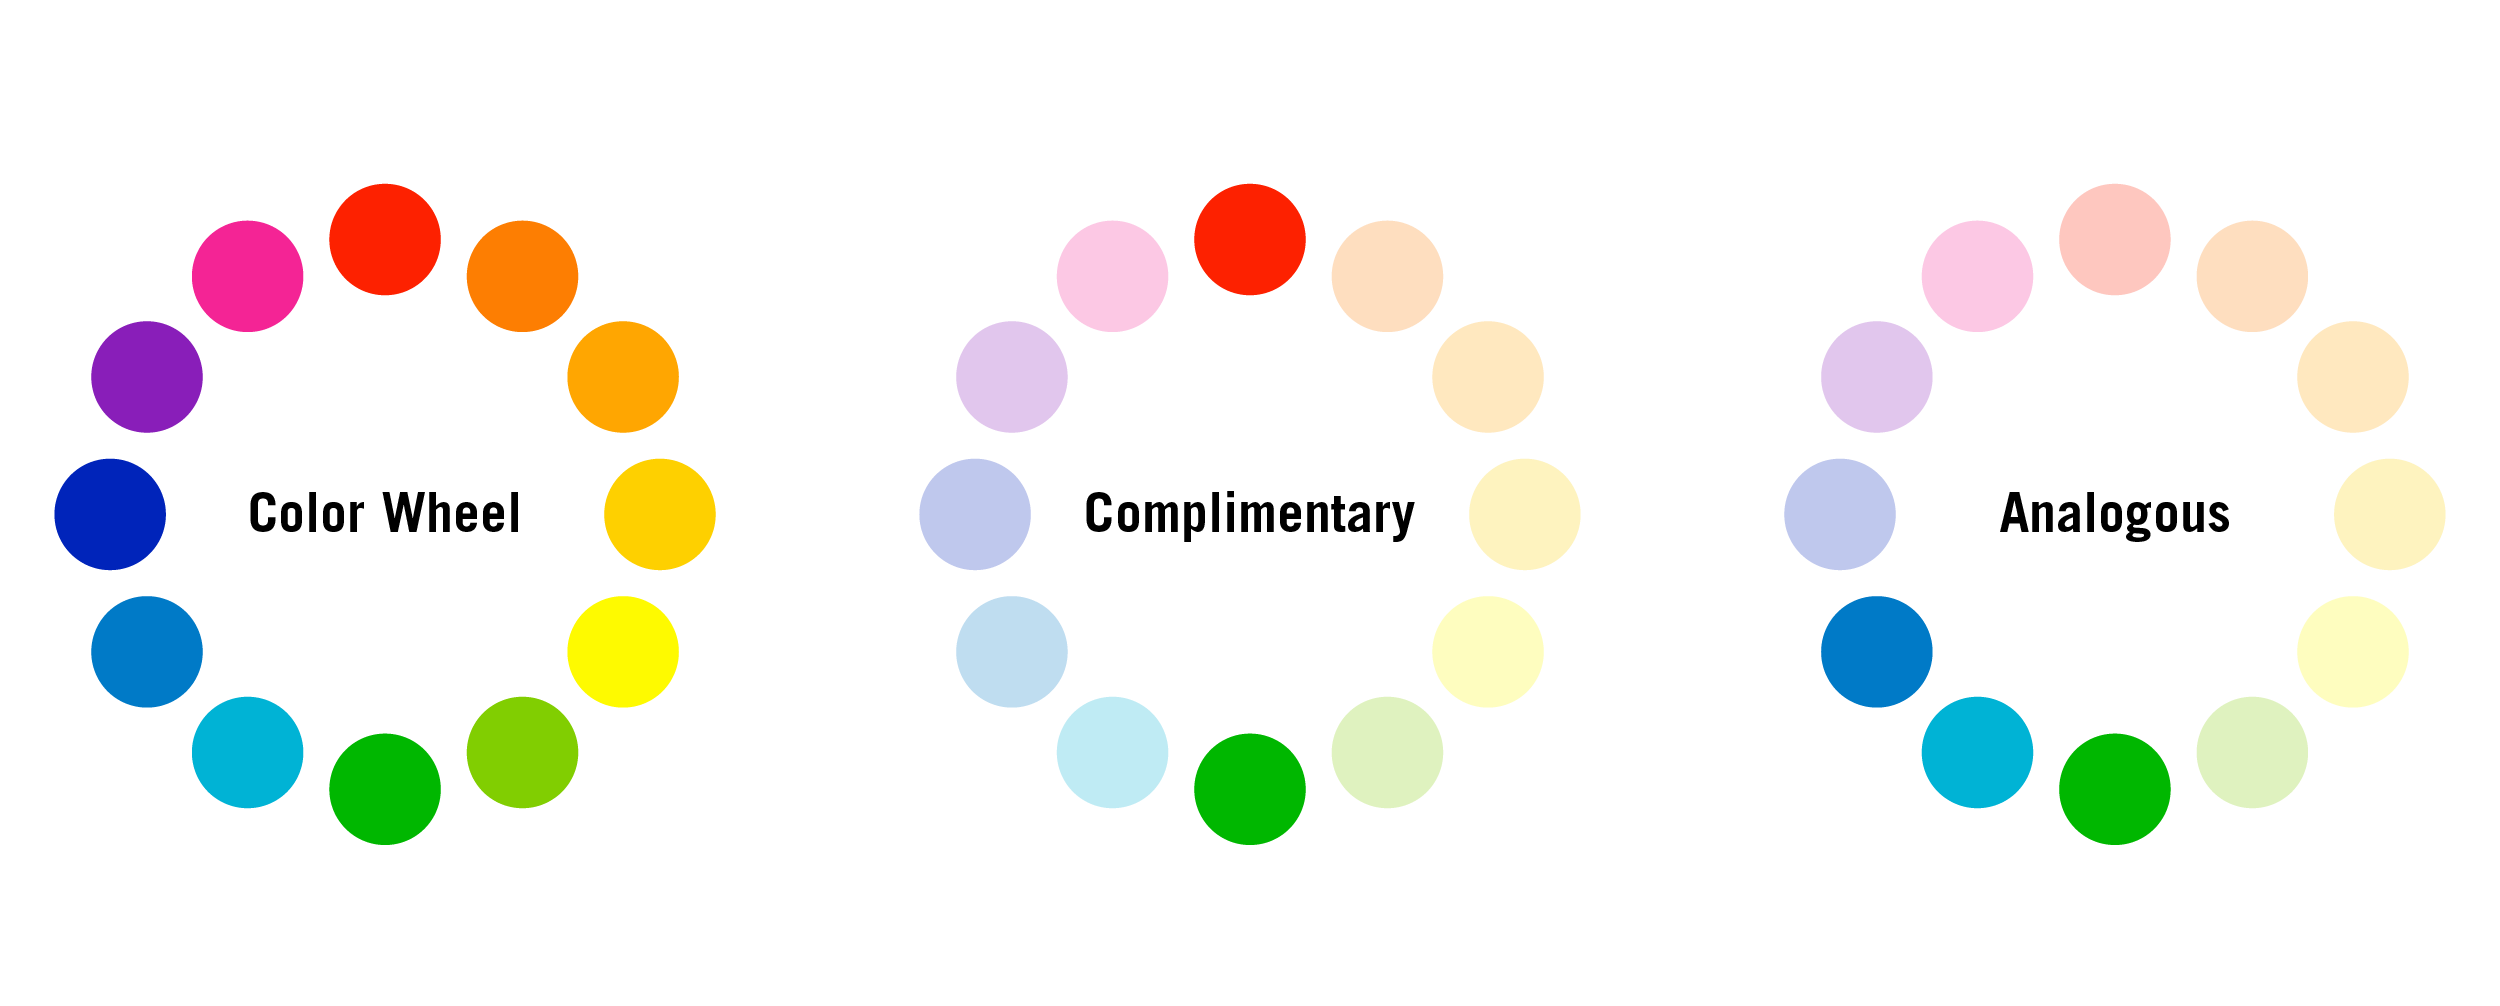 Color wheel, complimentary color example showing red and green, analogous color example showing blue and green